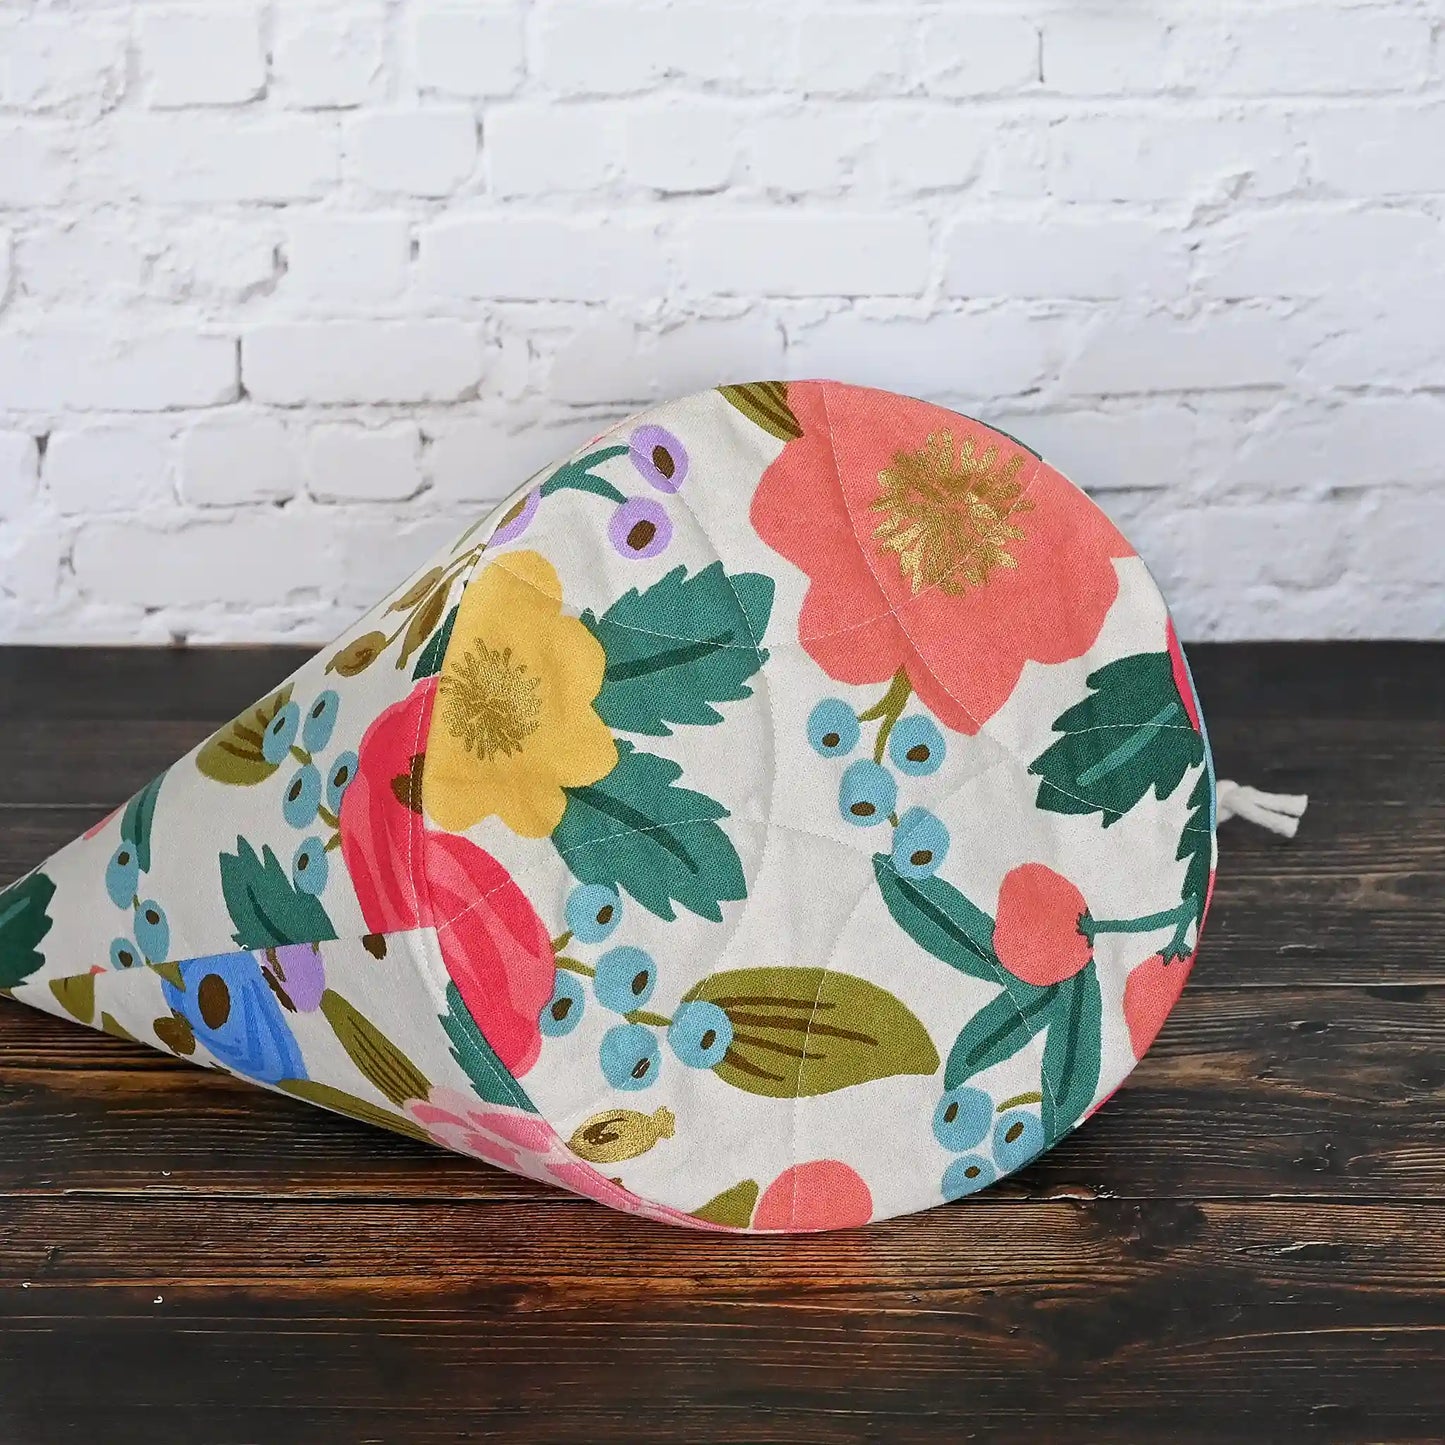 Canvas knitting project bag made from Rifle Paper Co's Antique Garden.  It has lots of pockets and is structured to stand alone.  Made in Canada by Yellow Petal Handmade.